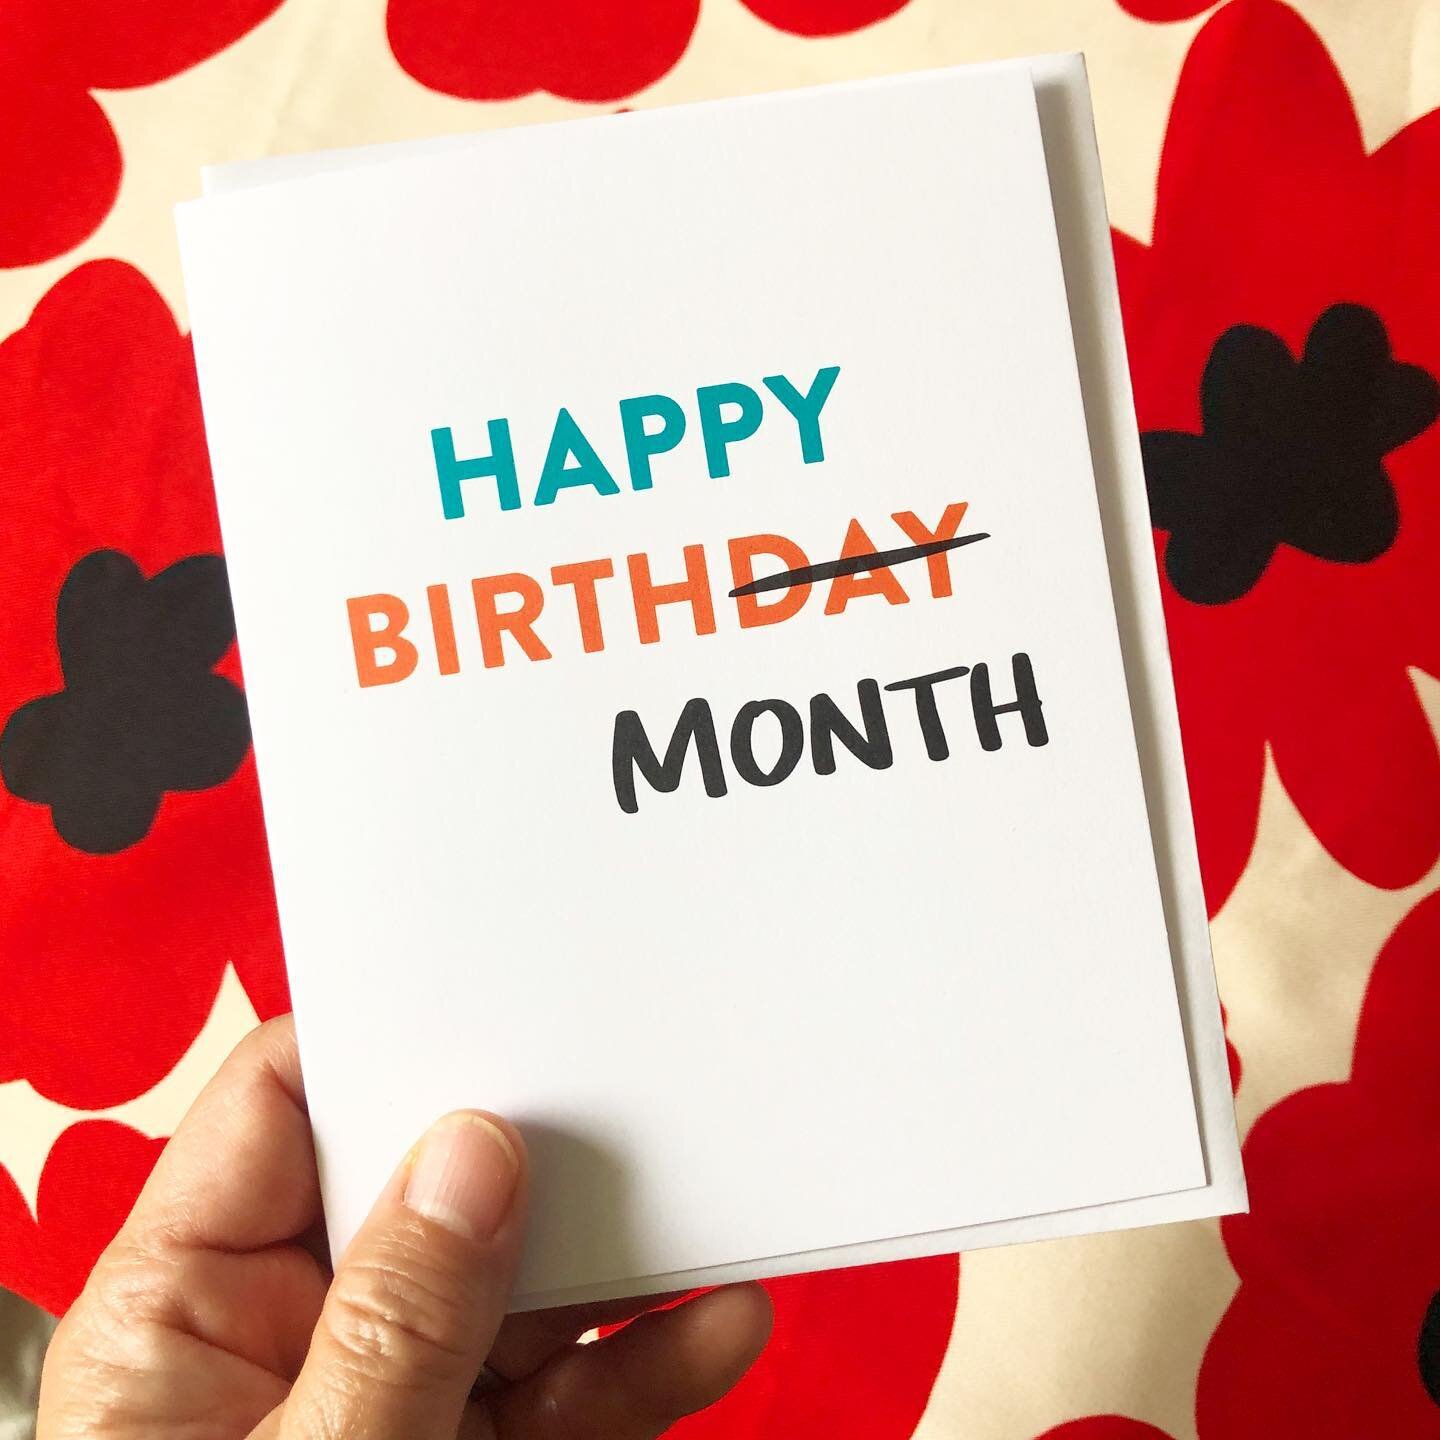 It&rsquo;s not belated if you&rsquo;re celebrating all month long, right?? 🥳

#toomanybirthdaysinonemonth  #celebrateallmonth #birthdaymonth #birthmonthcelebrations #thenewnorm #whynot #madewithlove #goodintentions #boise #idaho #madeinidaho #newcar